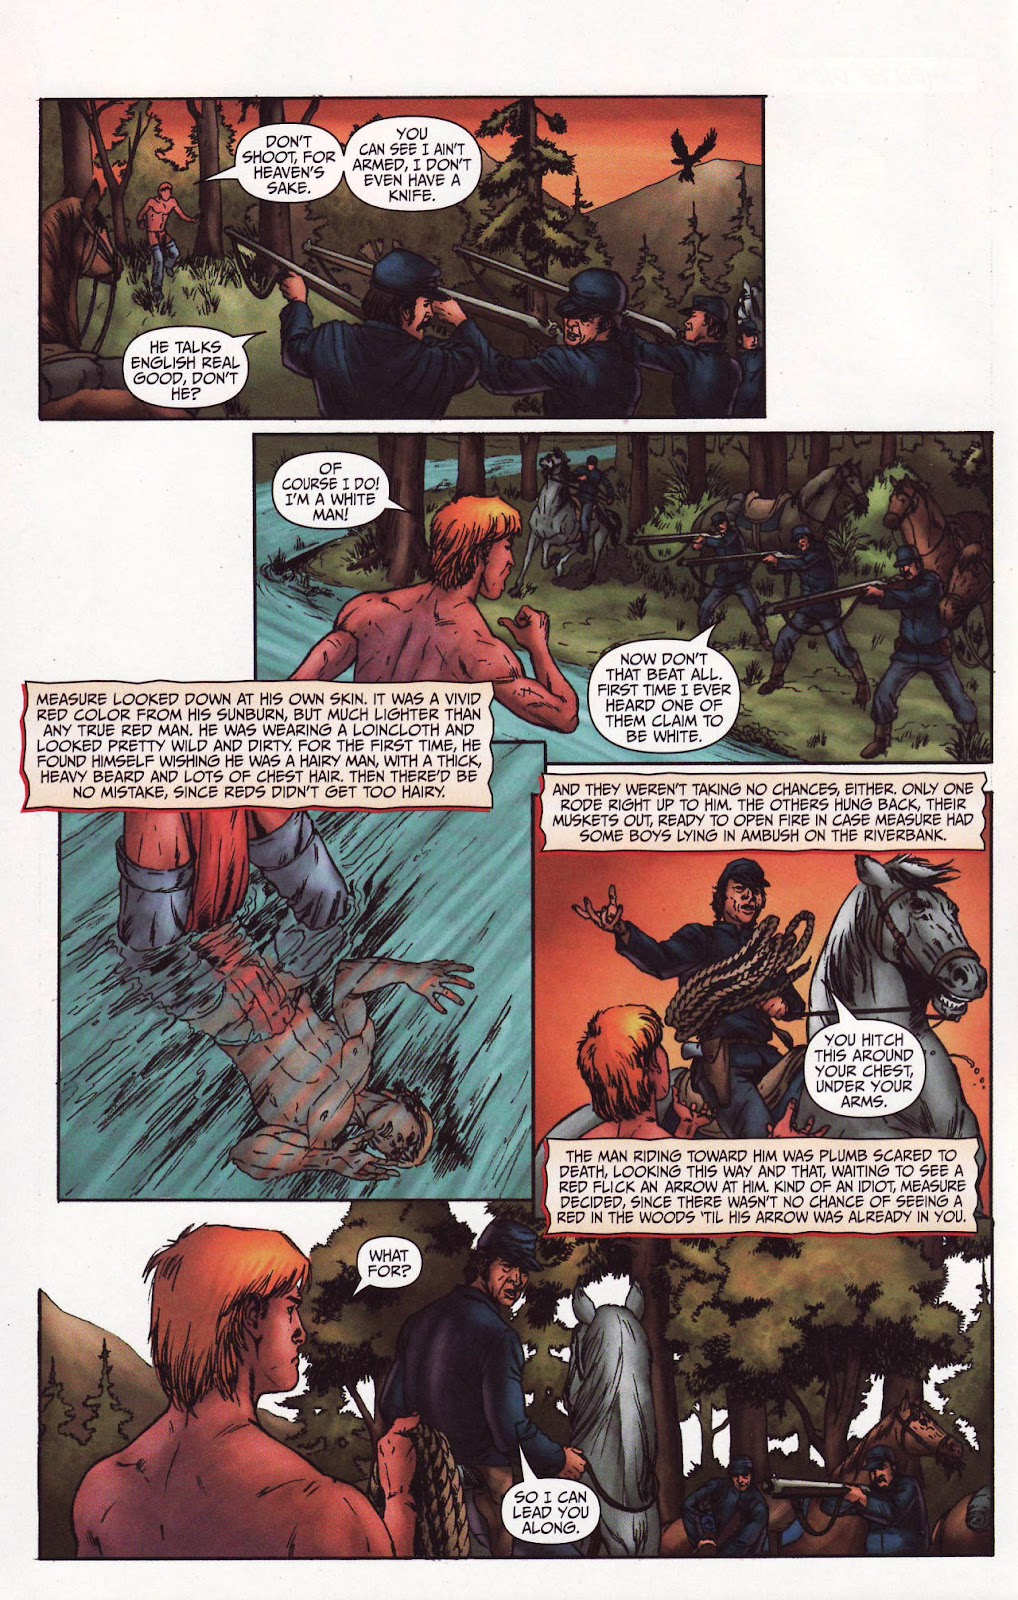 Red Prophet: The Tales of Alvin Maker issue 8 - Page 8